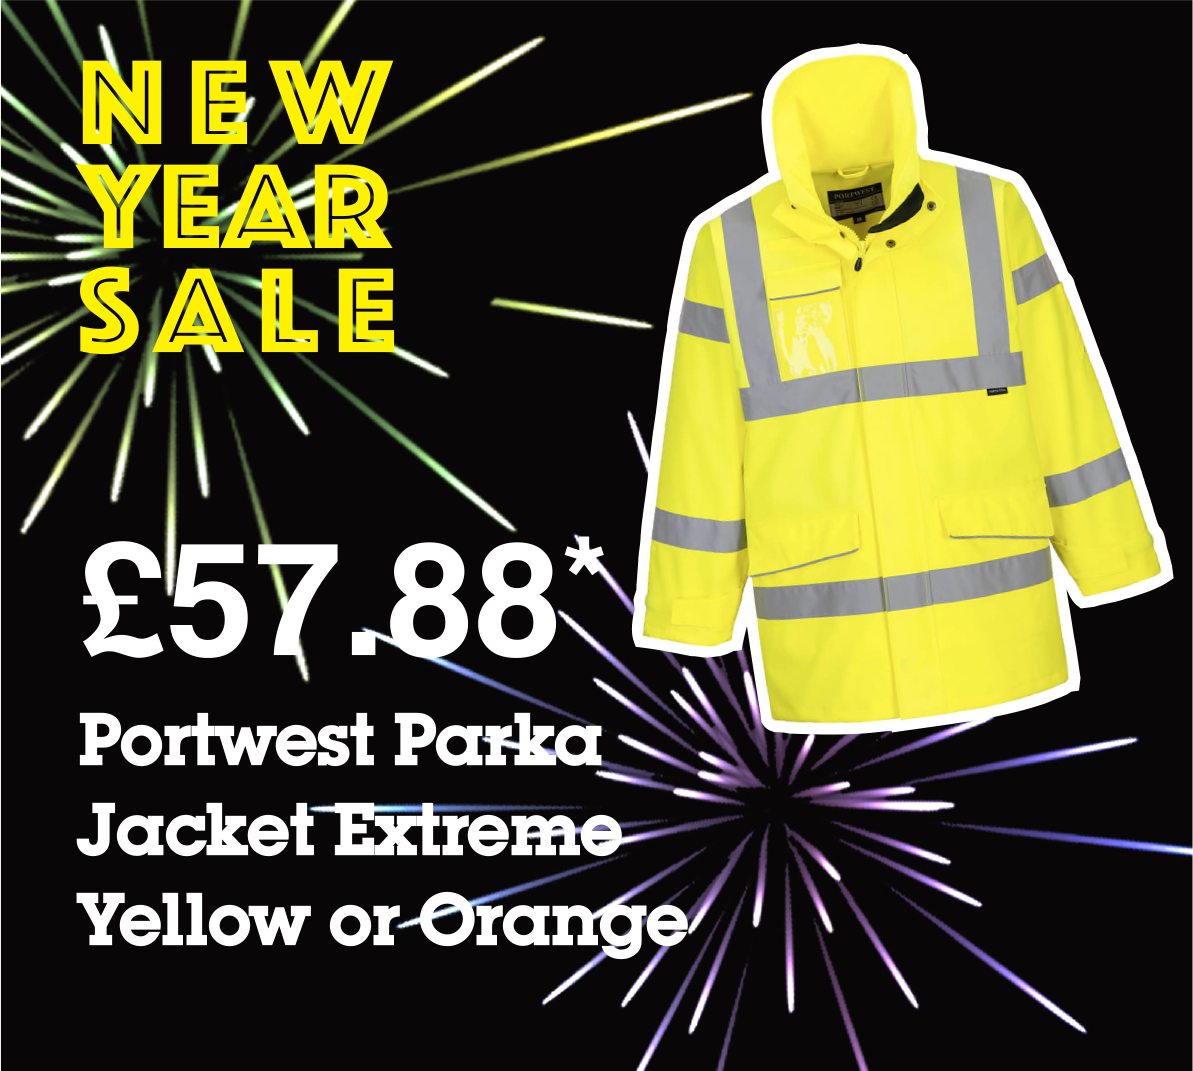 NEW YEAR SALE - NOW ON!

View full offers lists 
fwb.co.uk/product-range/…

Call 01782 744333 today

#promotion #promotions #offer #offers #newyearsale #januarysale #sale #salenowon